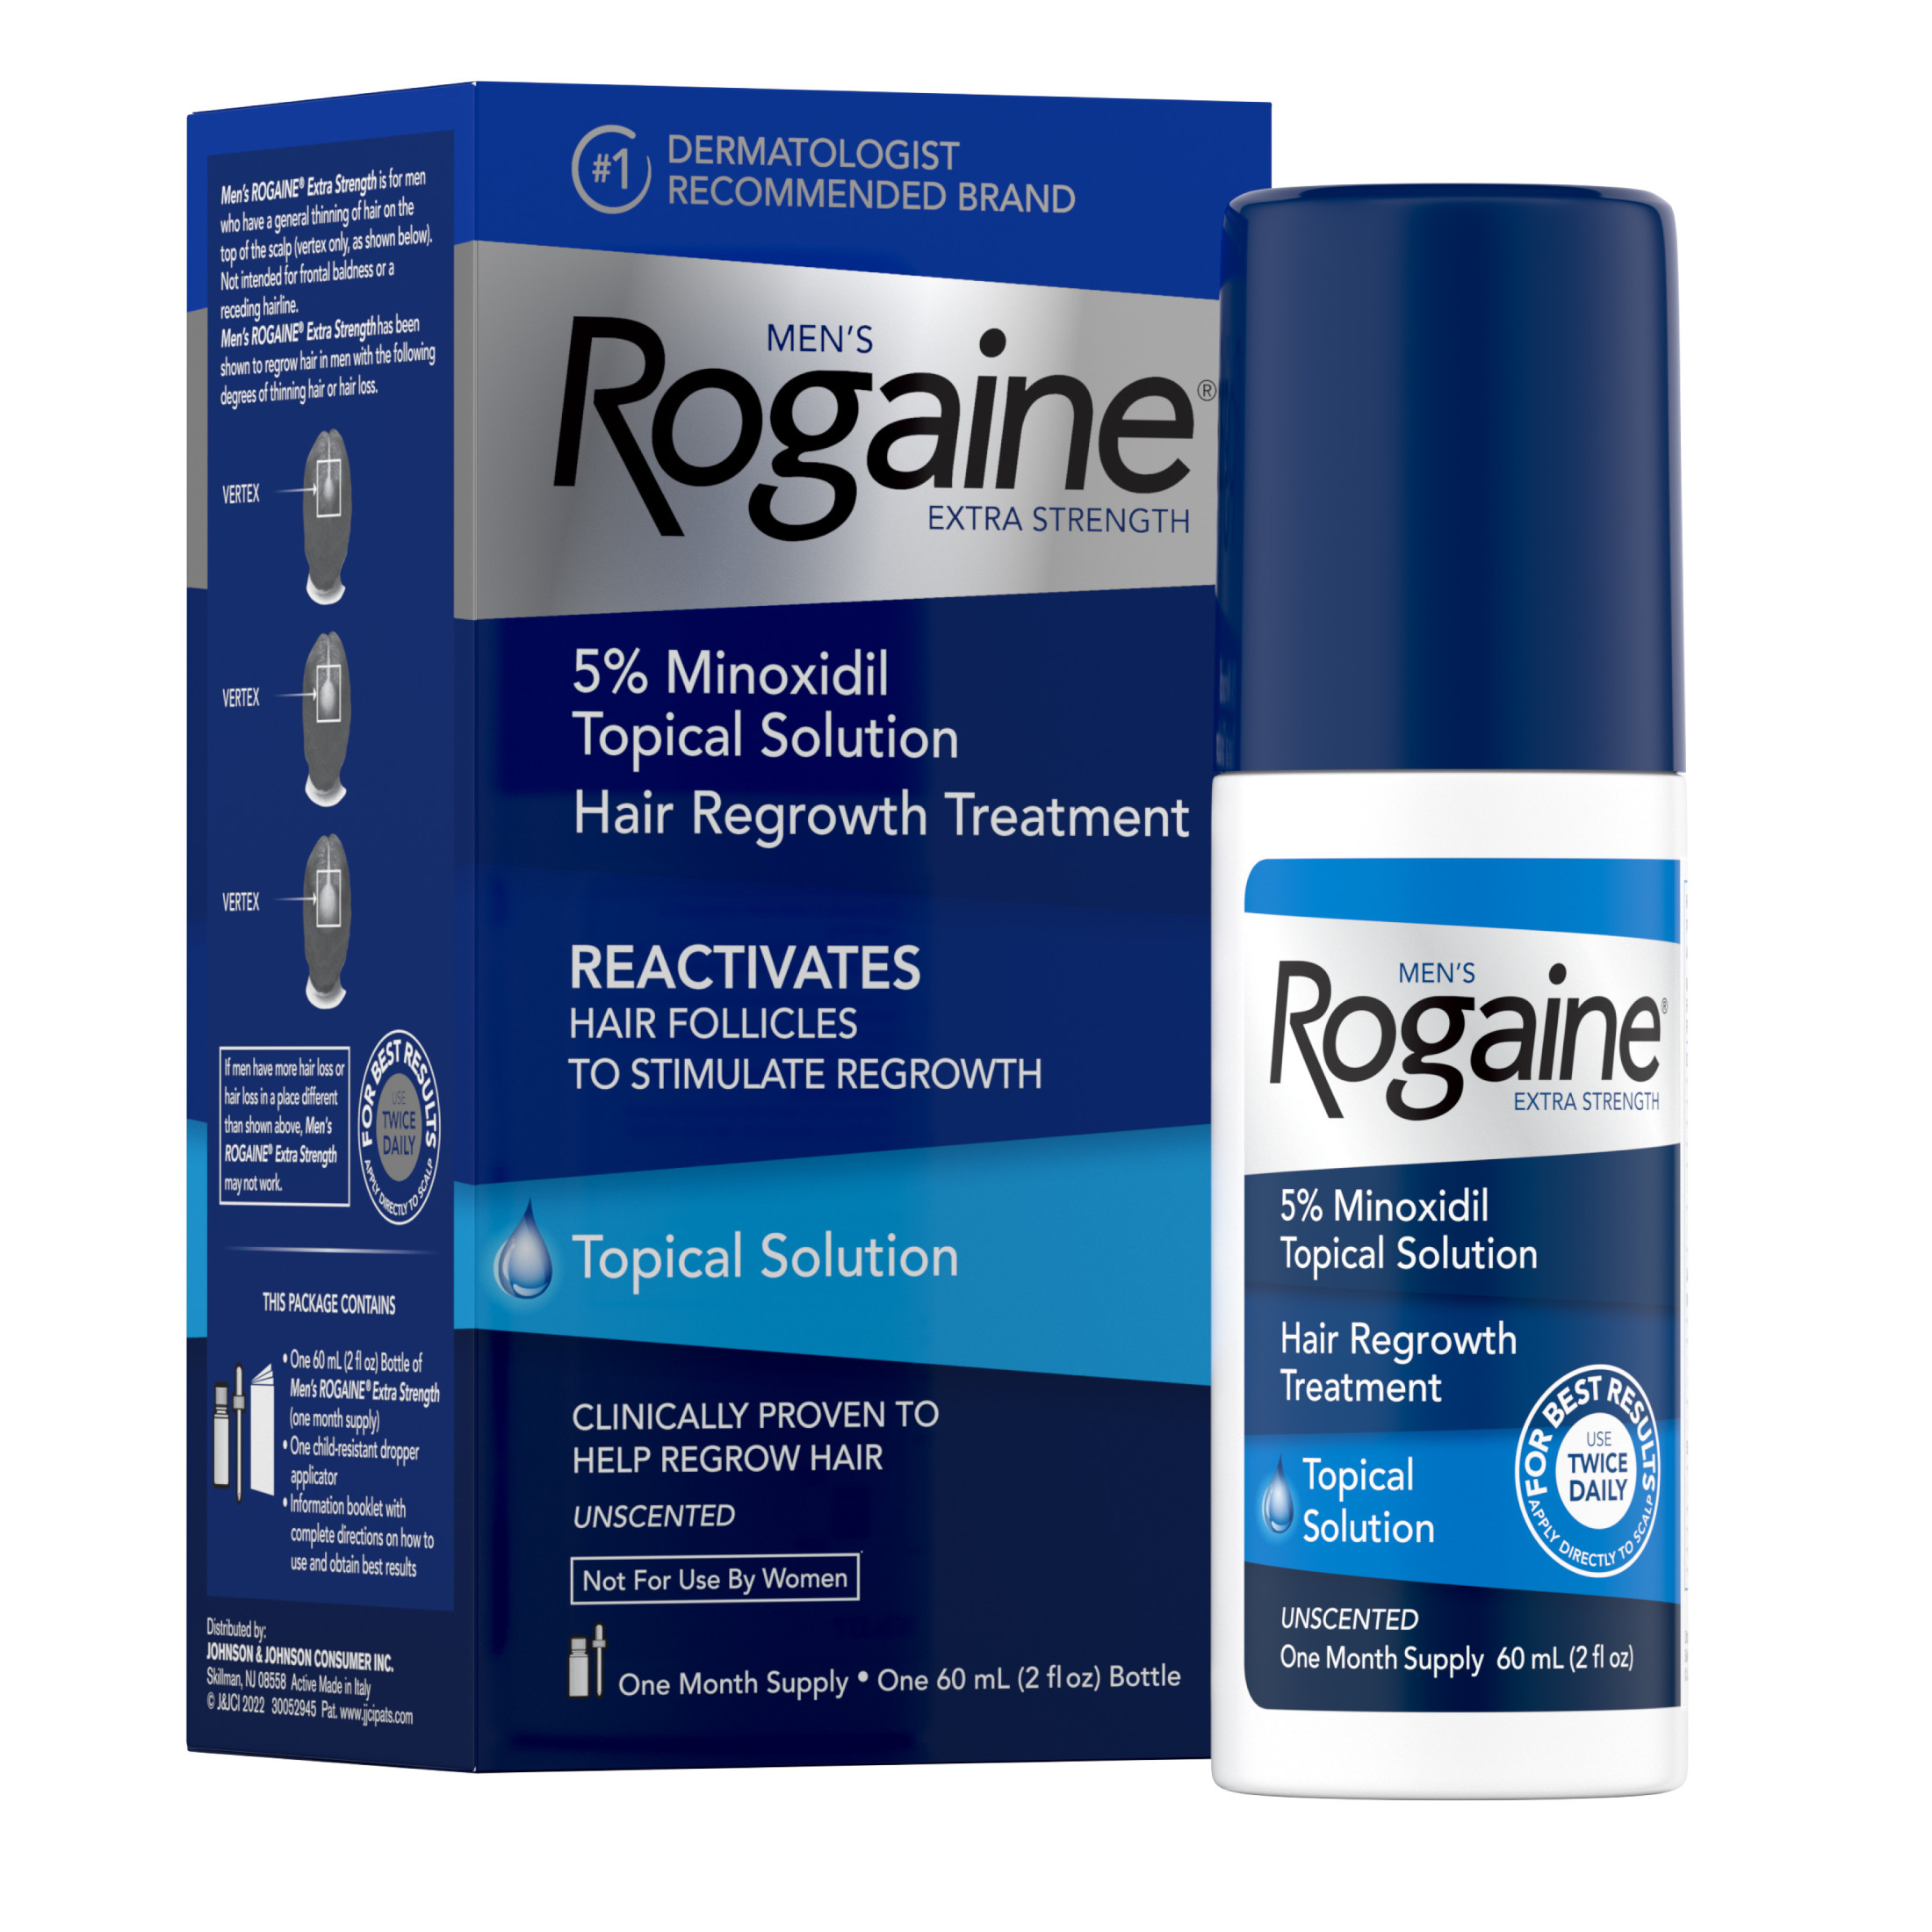 Men's Rogaine Extra Strength 5% Minoxidil Solution, 1-Month Supply - image 1 of 6